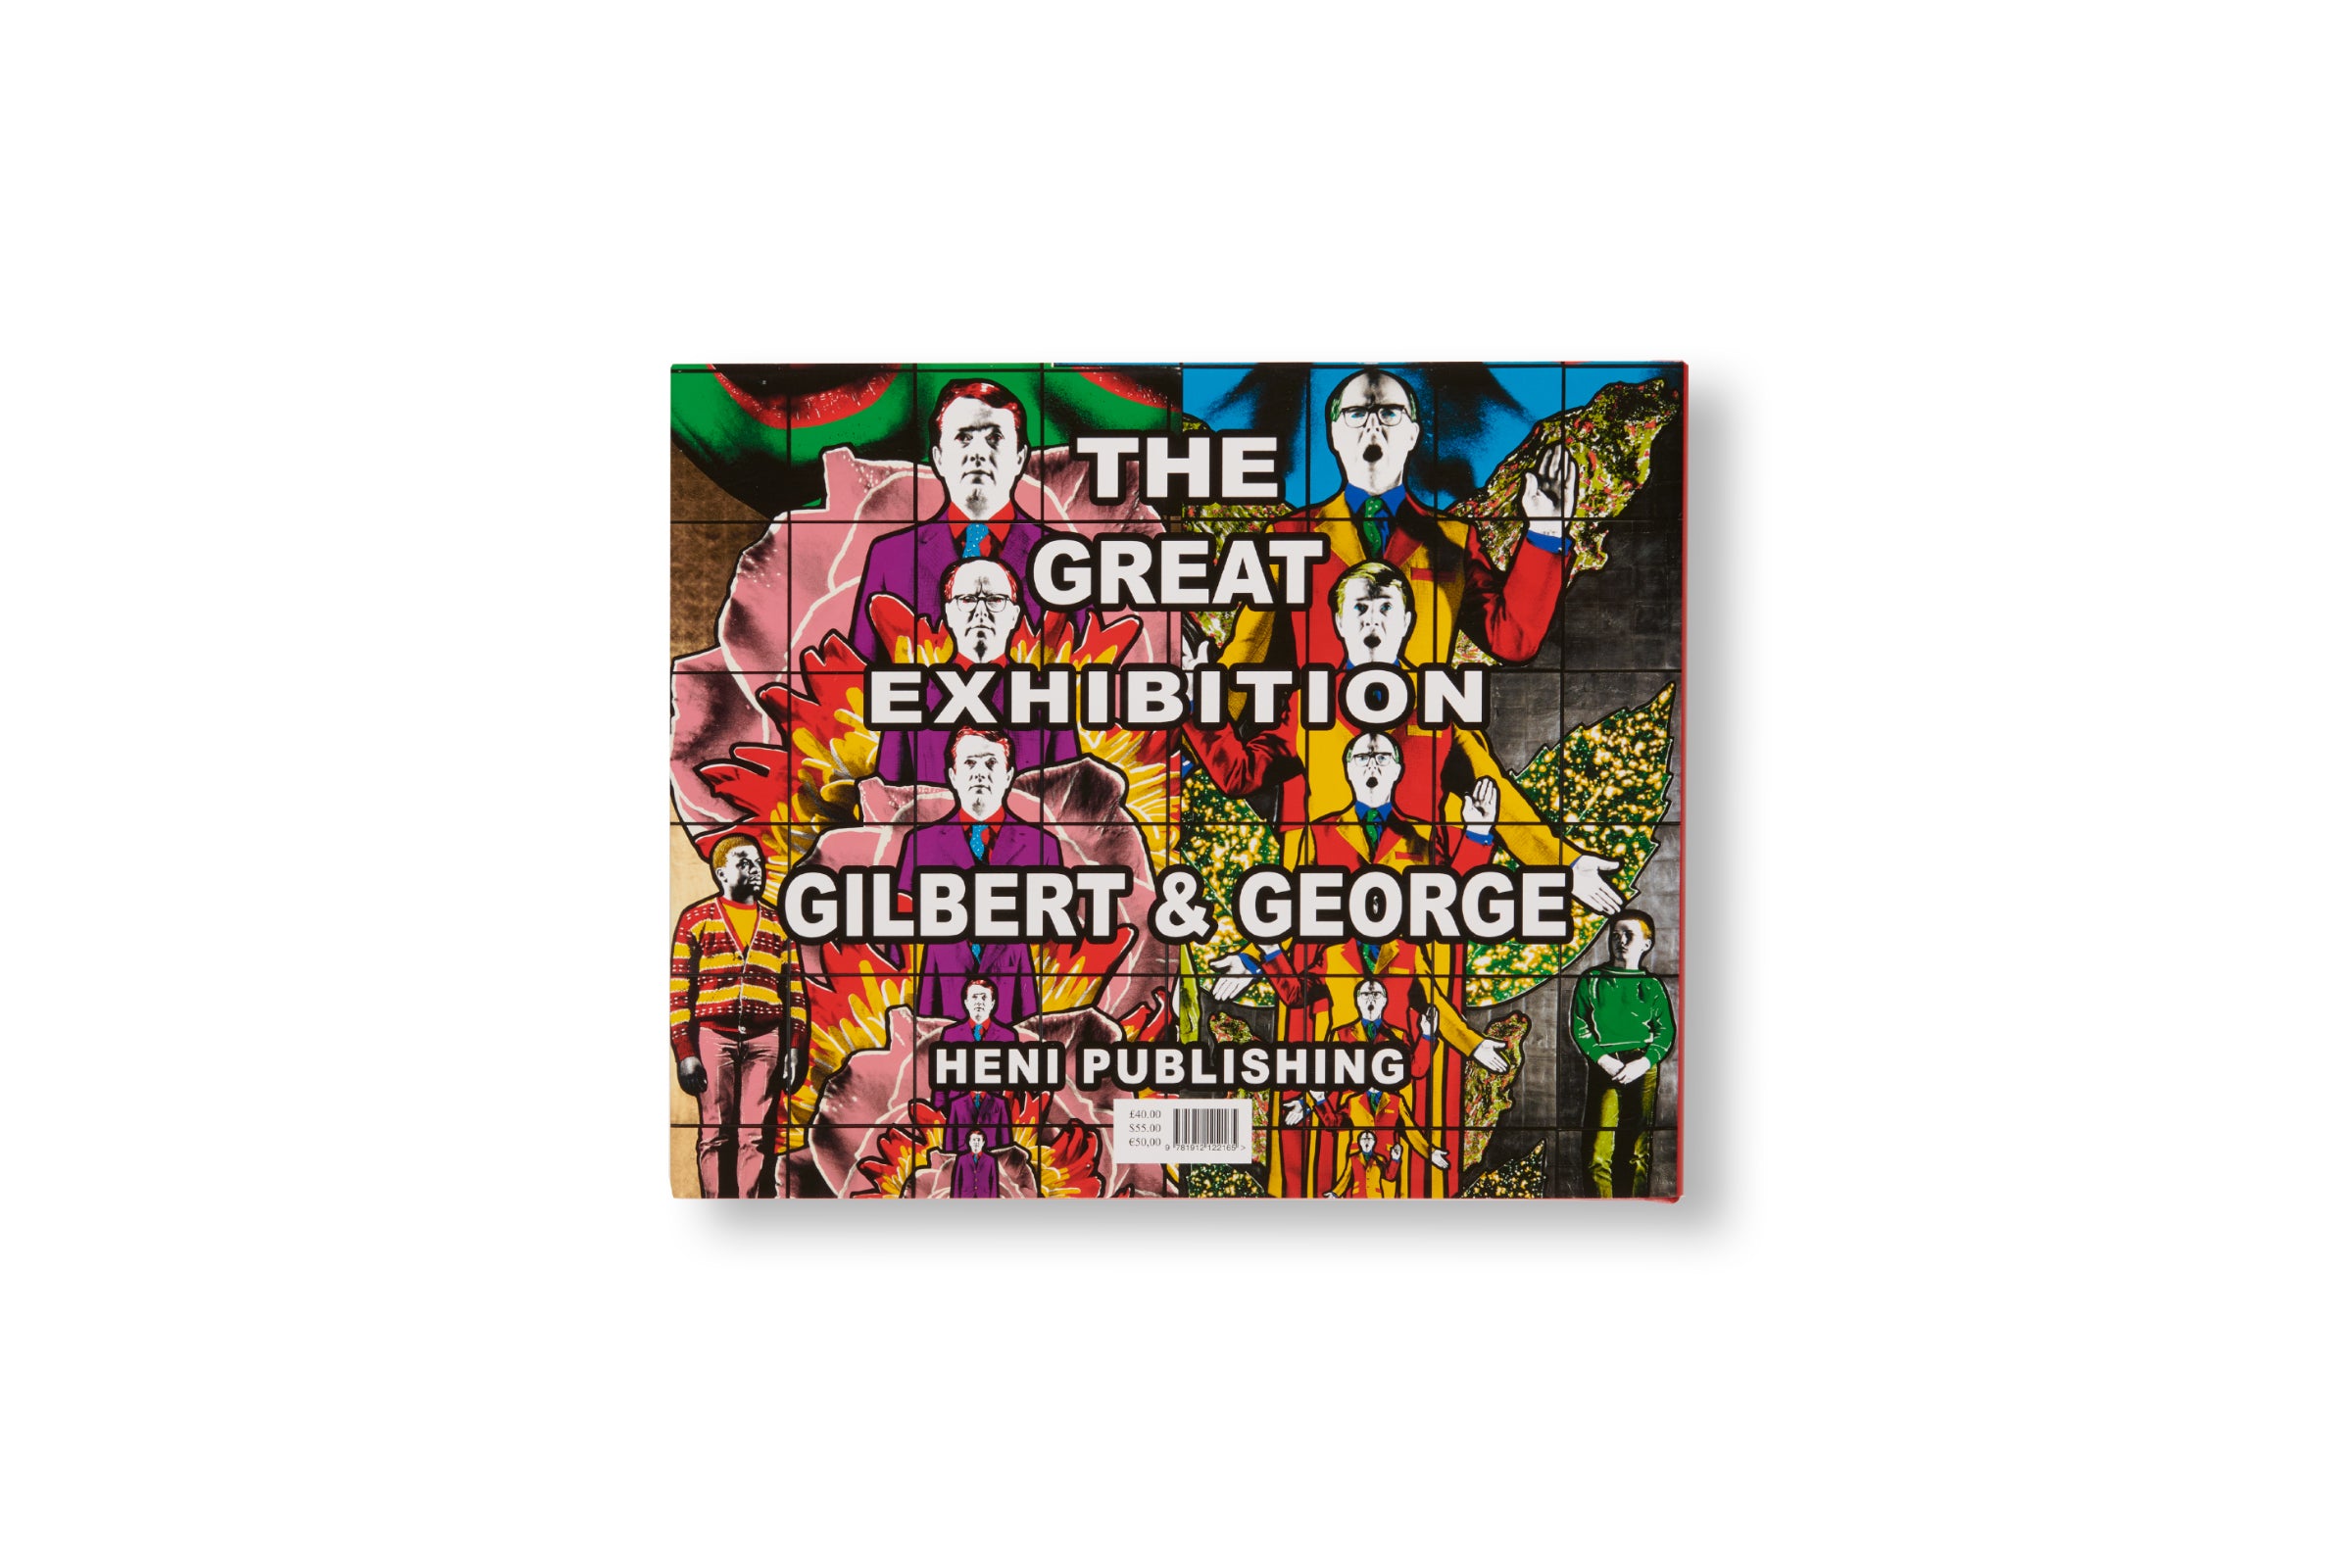 THE GREAT EXHIBITION by Gilbert and George